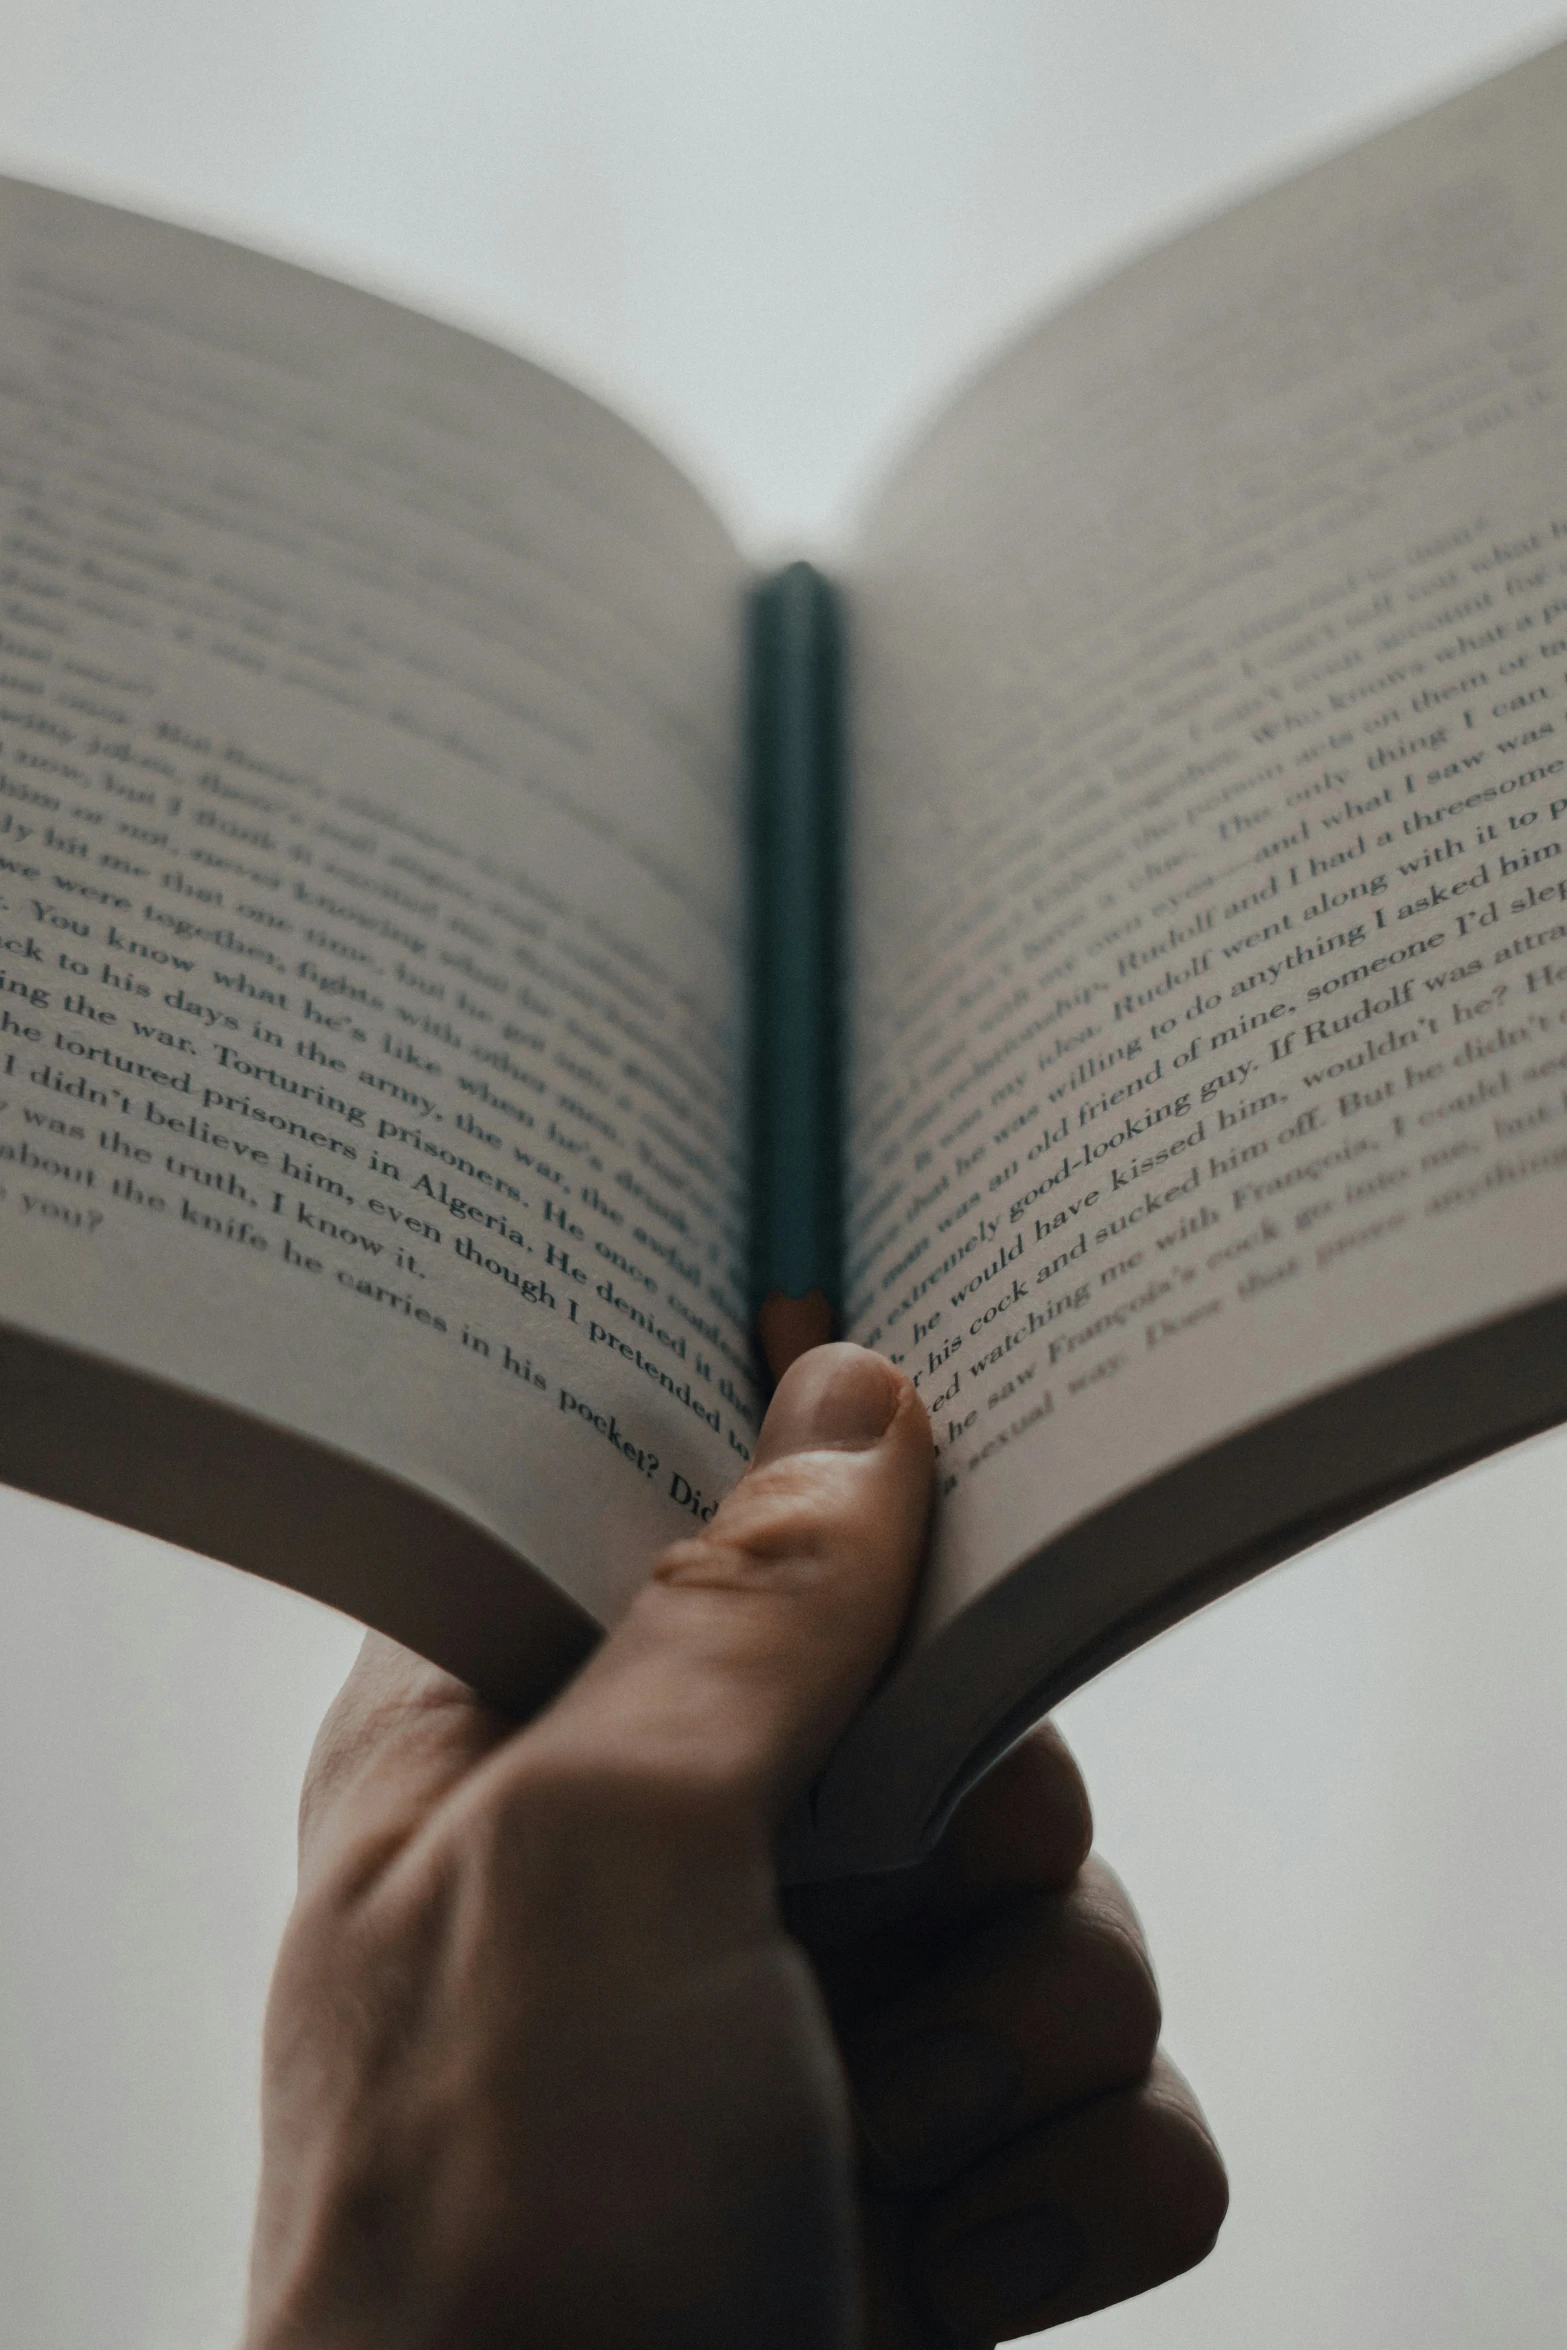 the image of a person's hand holding an open book